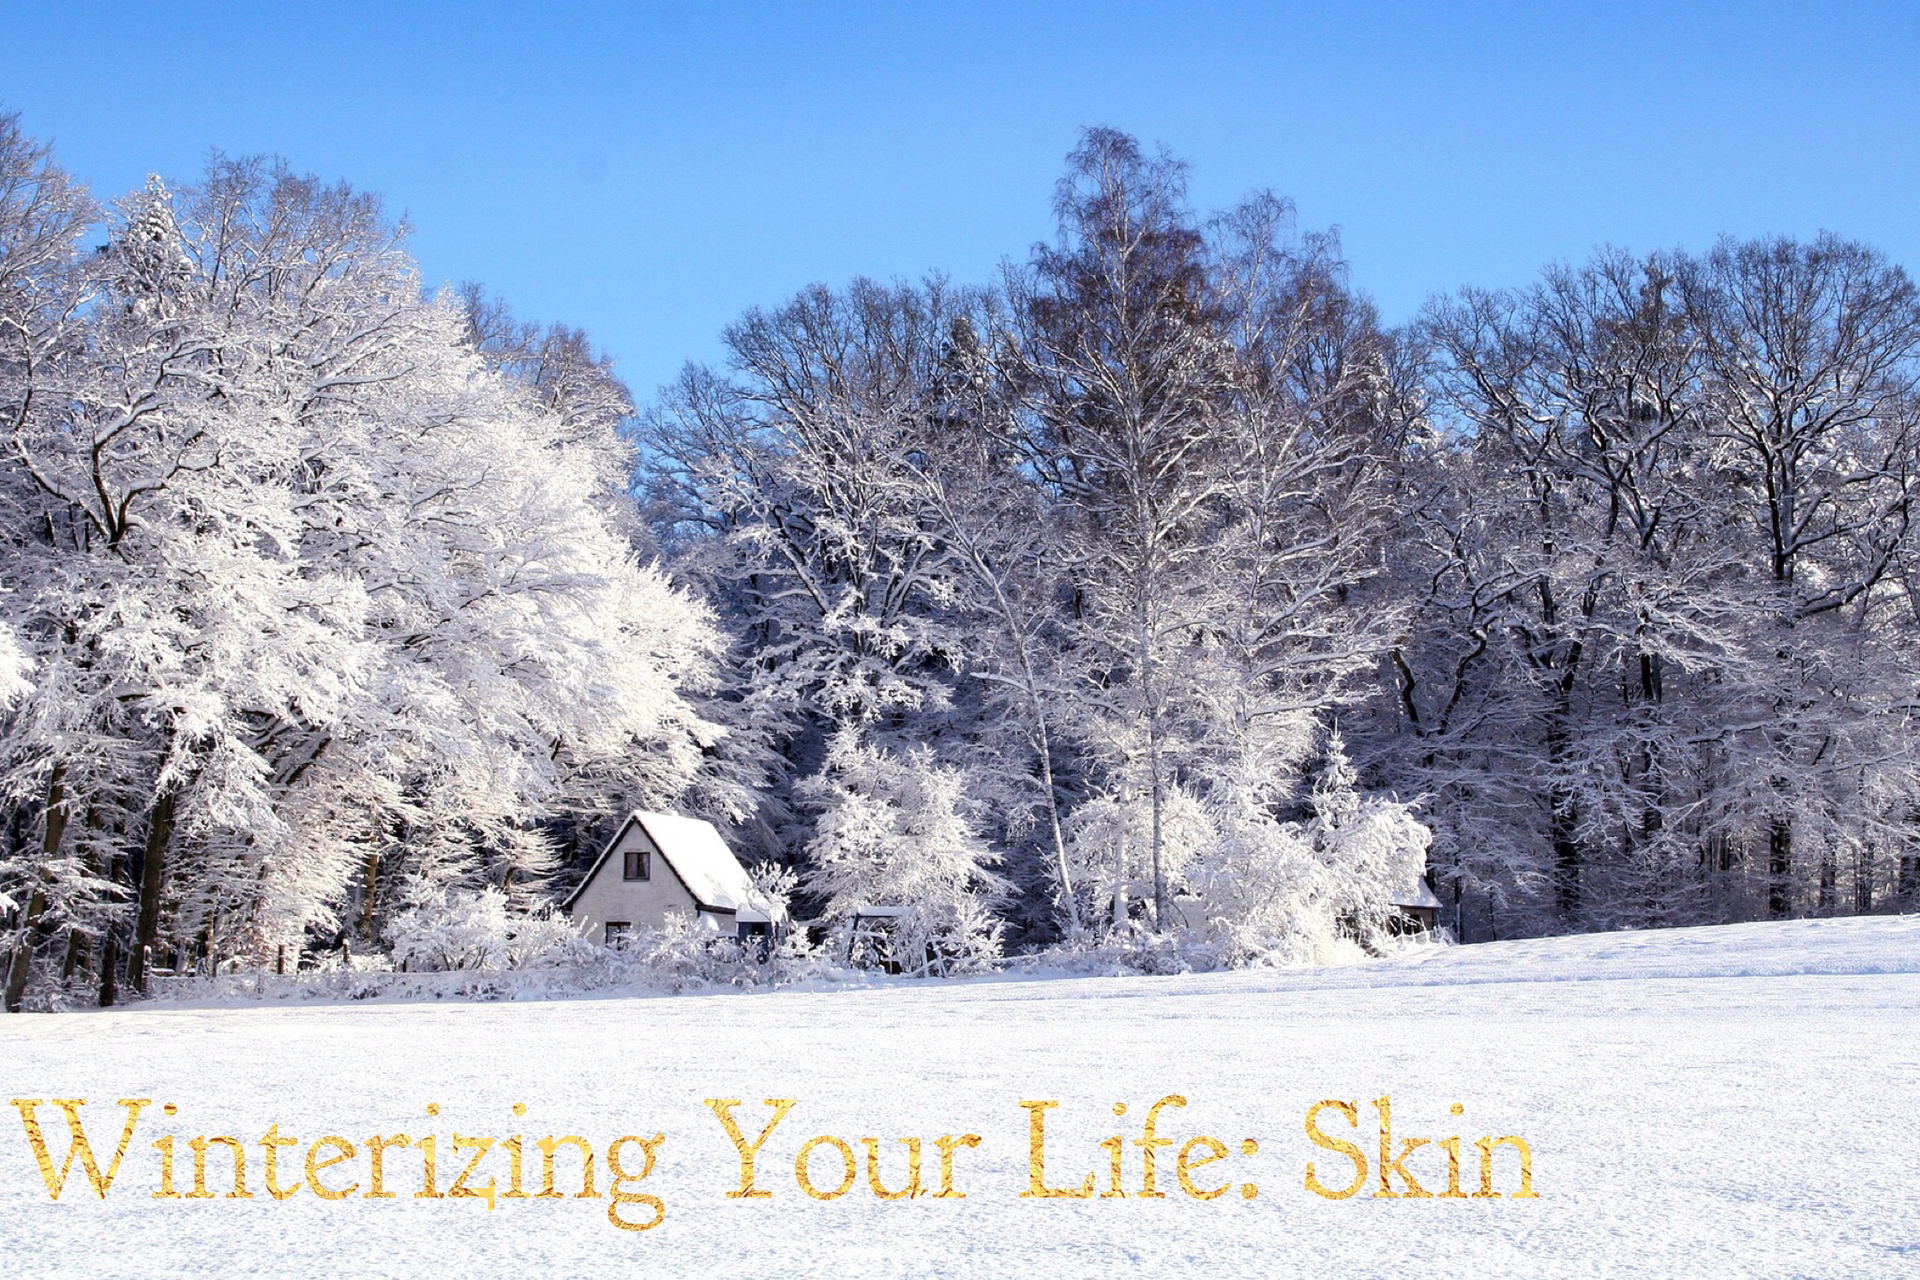 Image with winter background with the text Winterizing Your Life: Skin